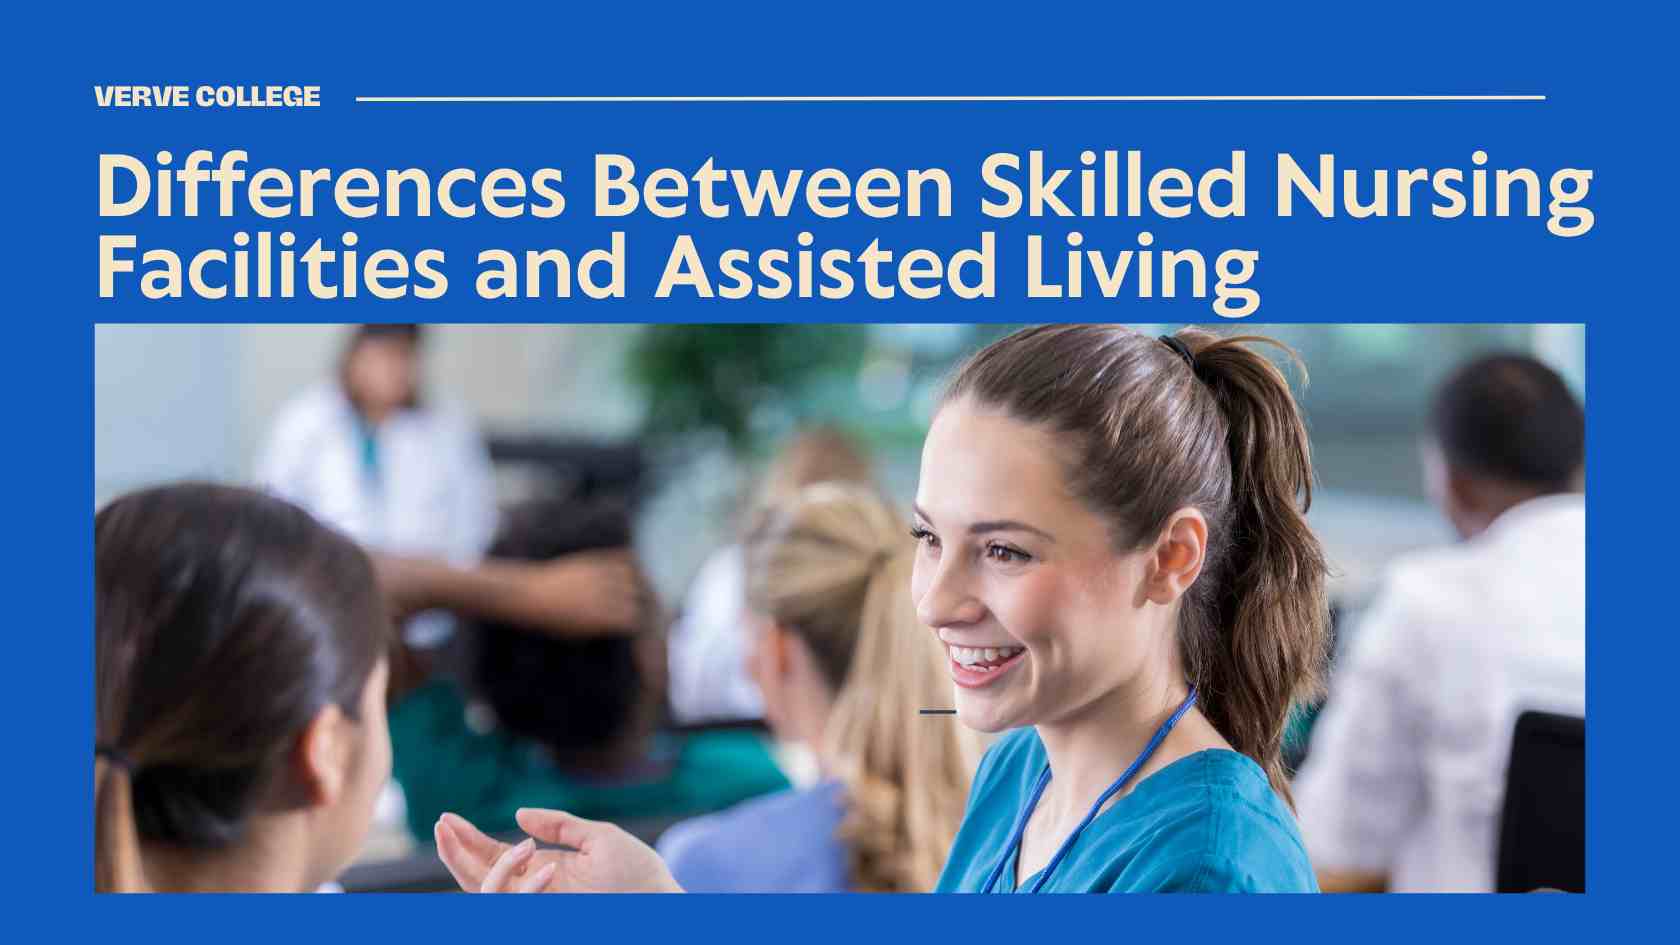 What Are the Main Differences Between Skilled Nursing Facilities and Assisted Living?